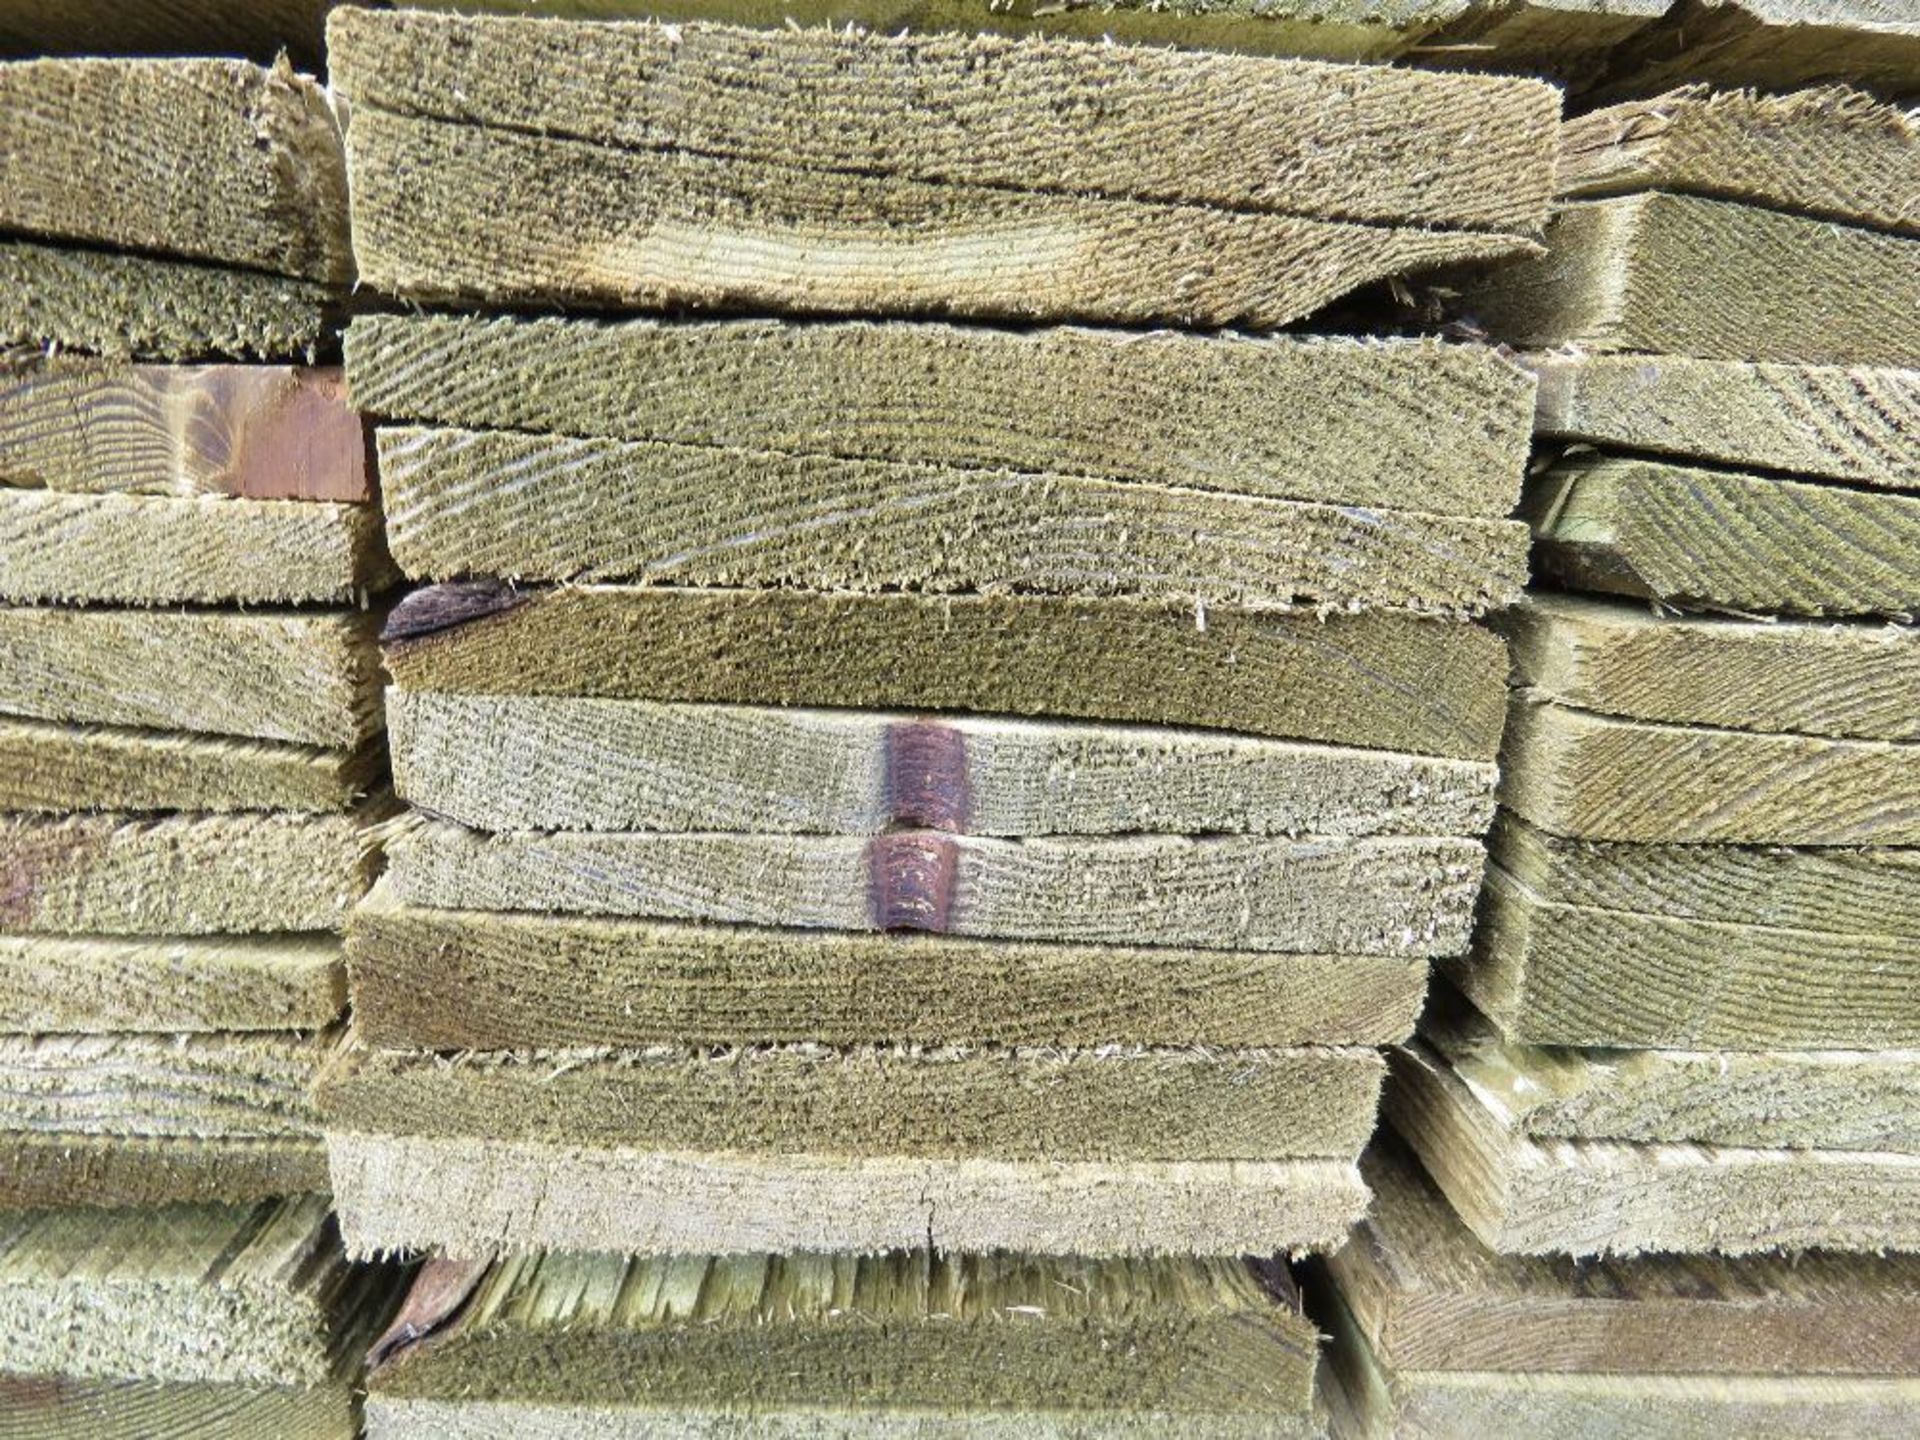 LARGE PACK OF TREATED FEATHER EDGE FENCE CLADDING TIMBER BOARDS. 1.50M LENGTH X 100MM WIDTH APPROX. - Image 3 of 3